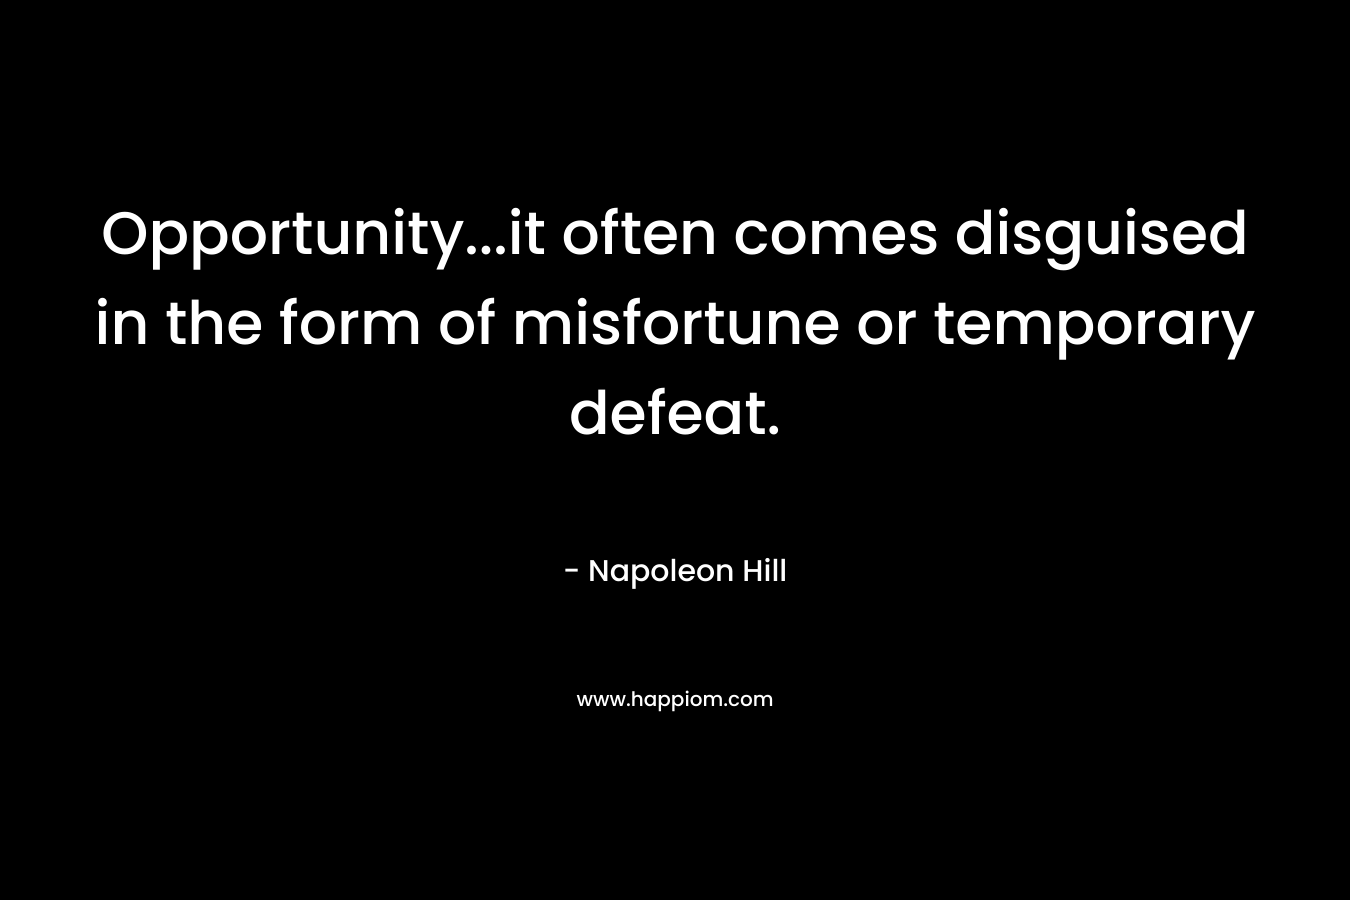 Opportunity…it often comes disguised in the form of misfortune or temporary defeat. – Napoleon Hill